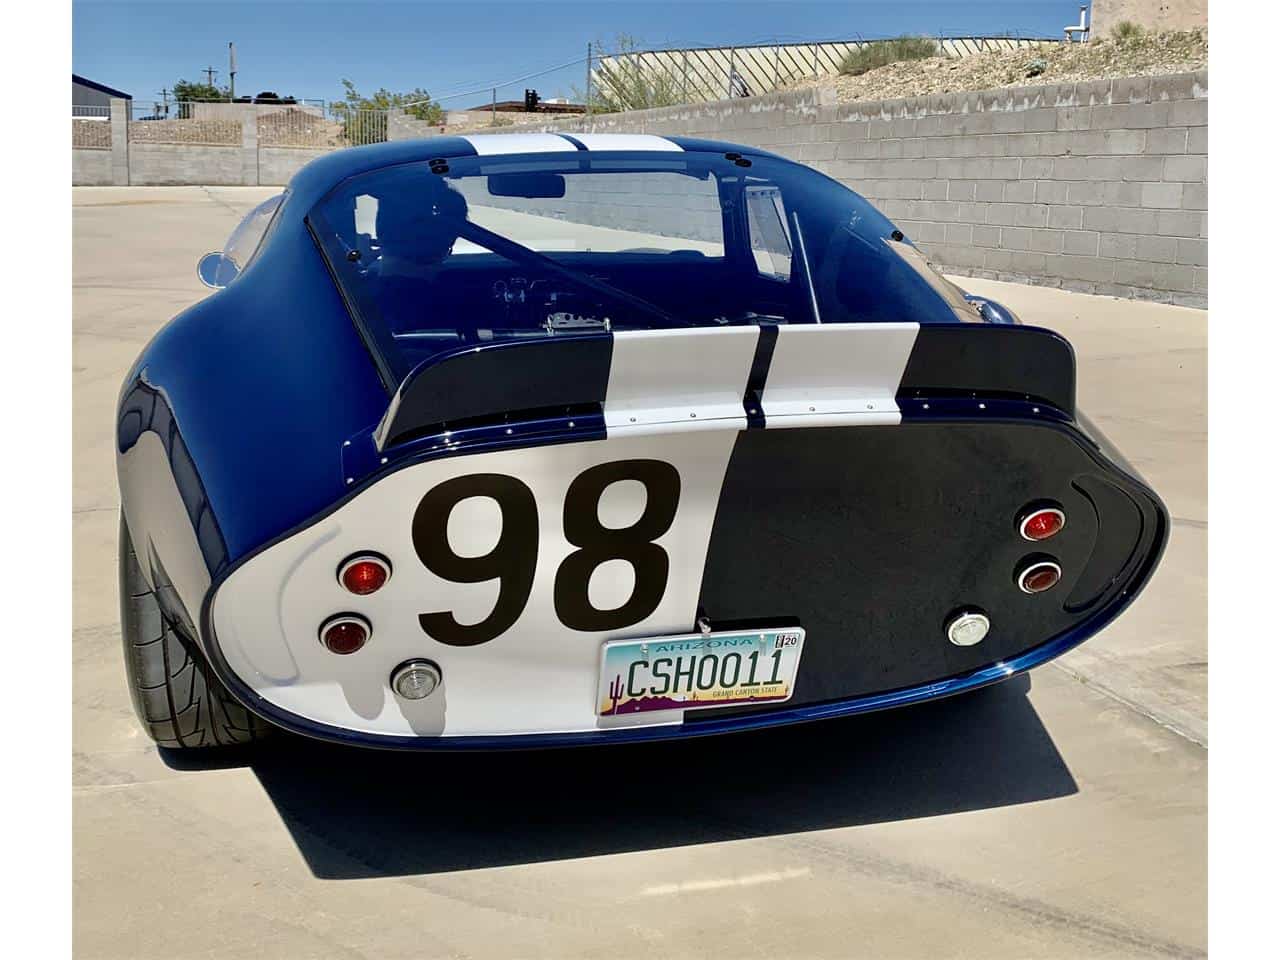 Factory Five Daytona, Featured listing: 1965 Shelby Daytona Coupe (Factory Five reproduction), ClassicCars.com Journal